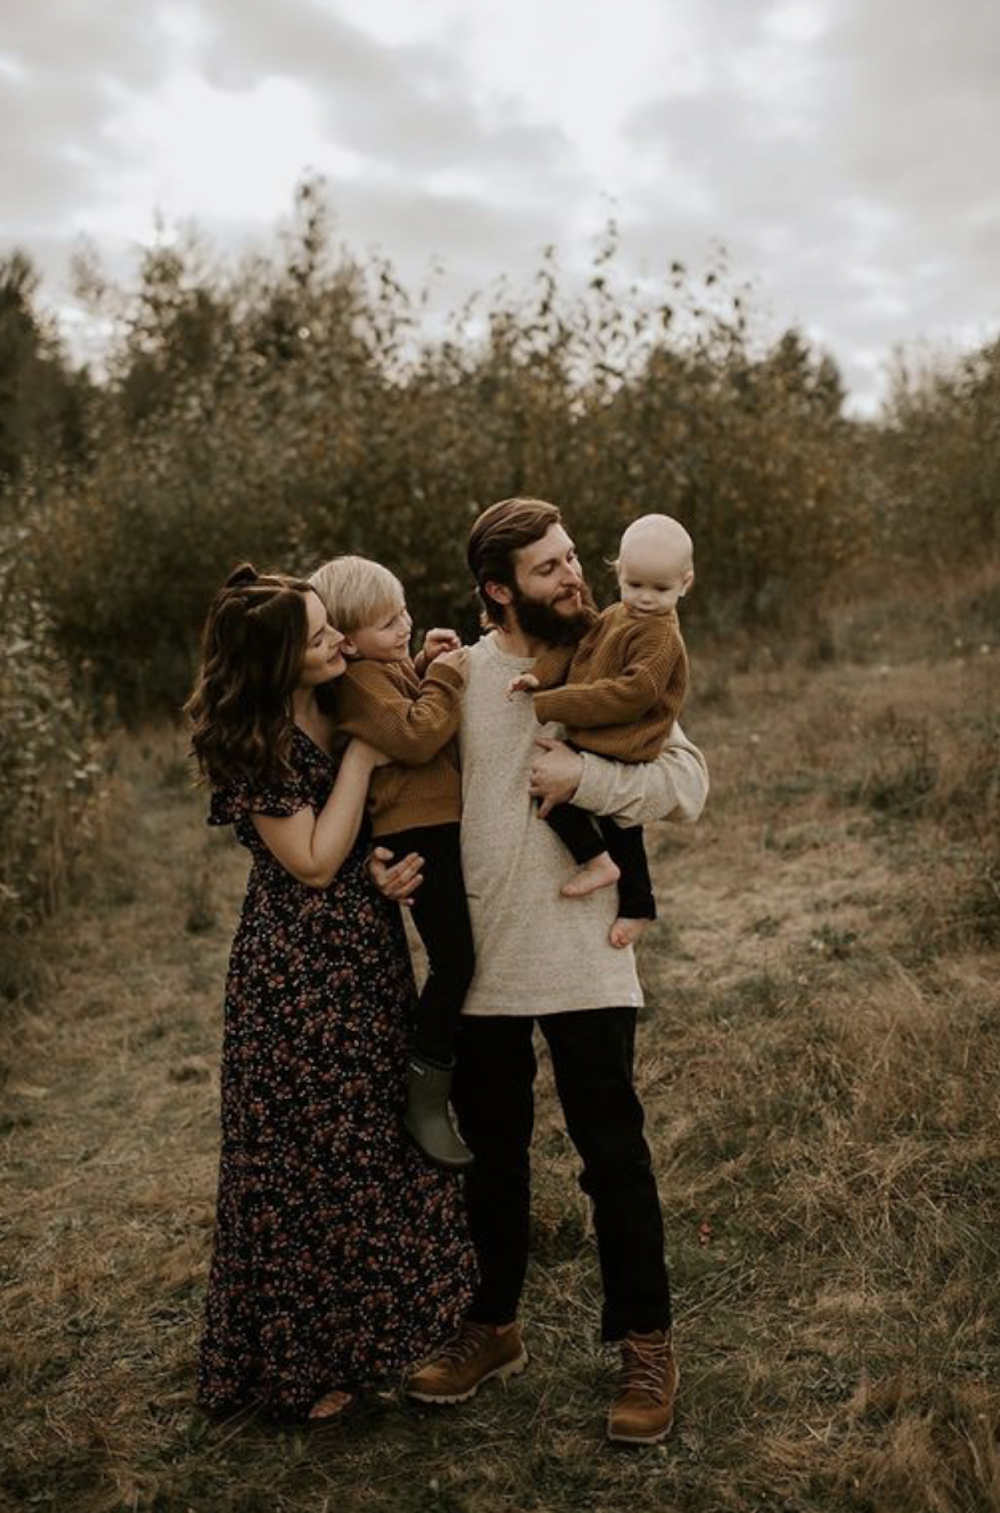 image of a fall family photo session with a man, woman, and two children in neutral outfits and the mom in a long black maxi floral dress